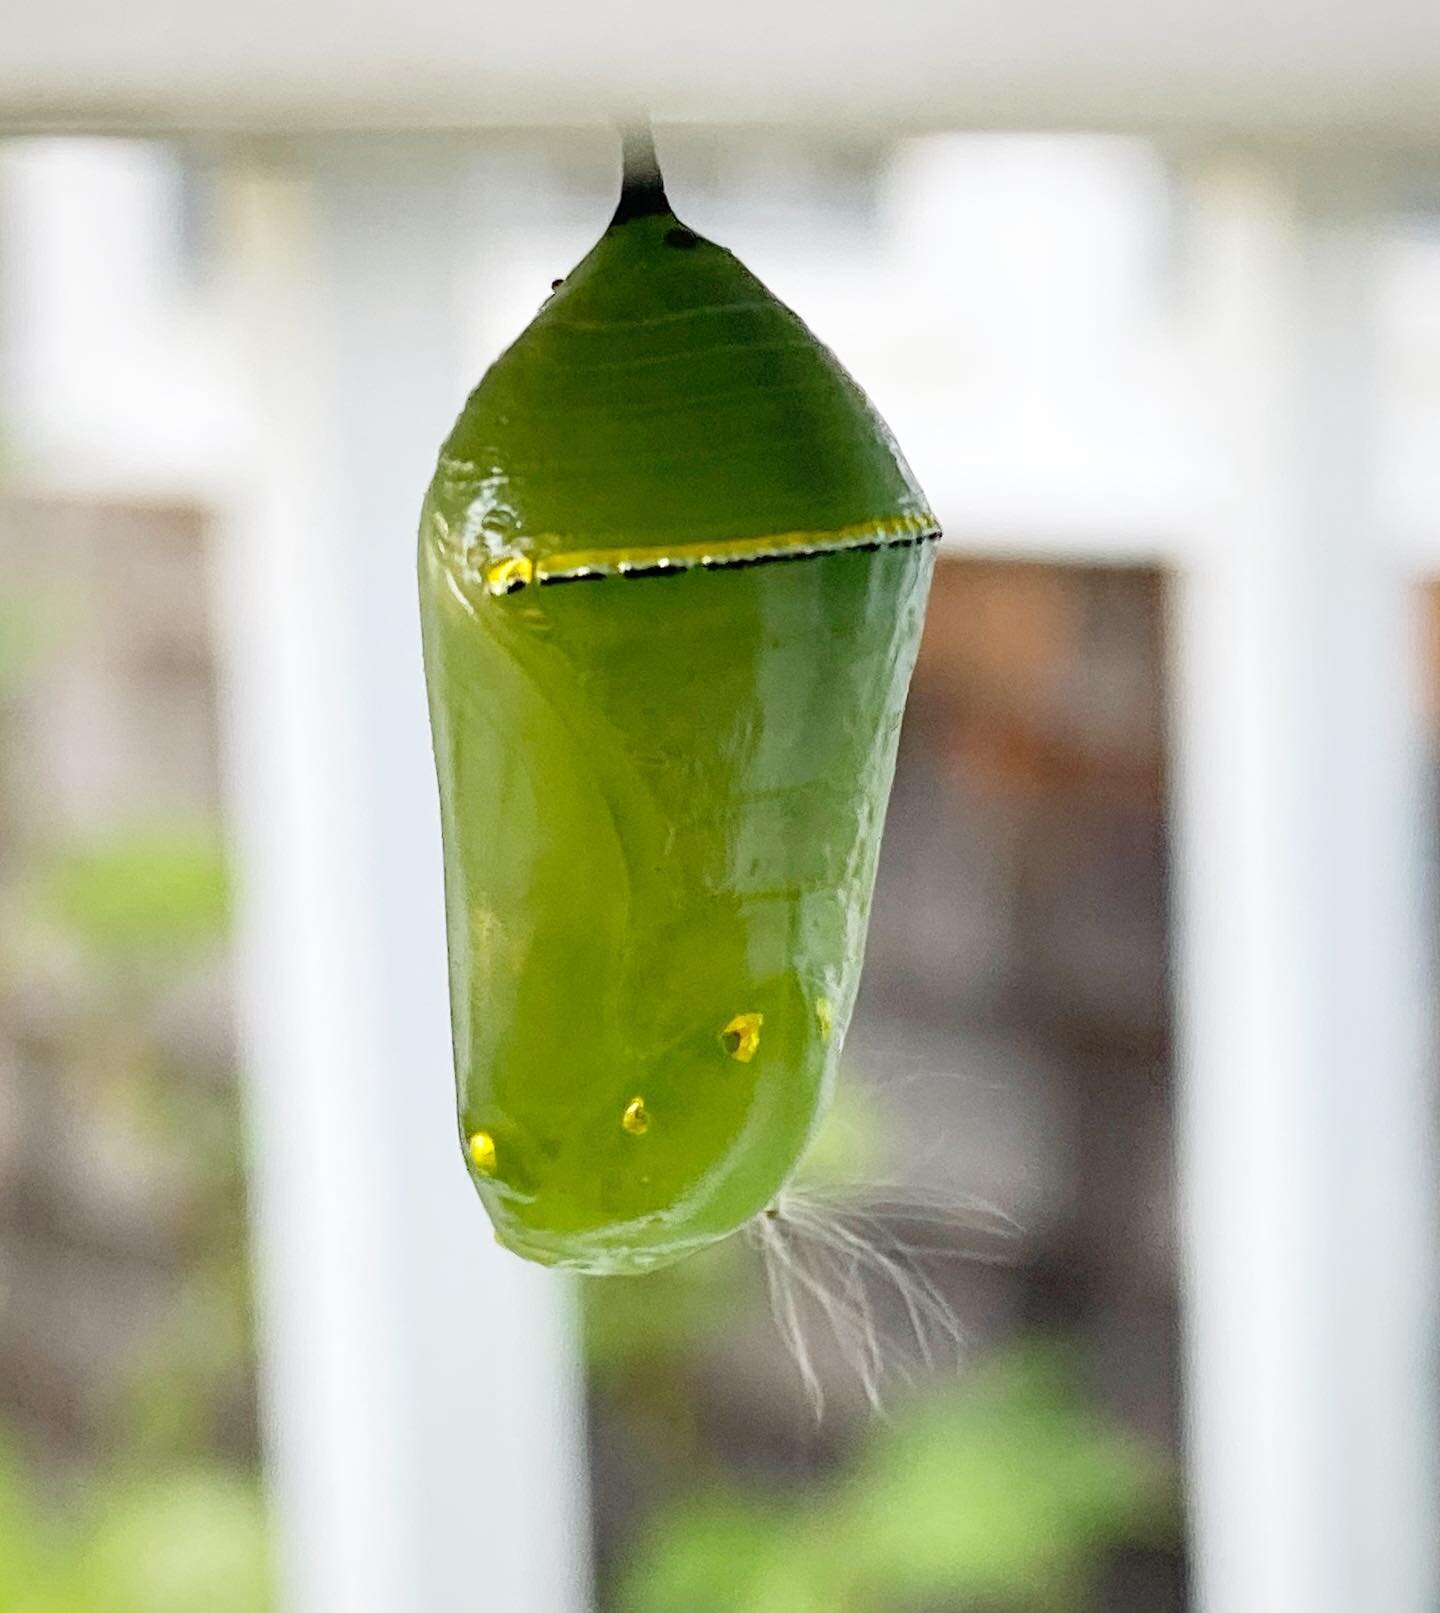 Gilded chrysalis with a curious beard living rent free on the porch. #monarch #queencaterpillar #chrysalis #milkweedfluff